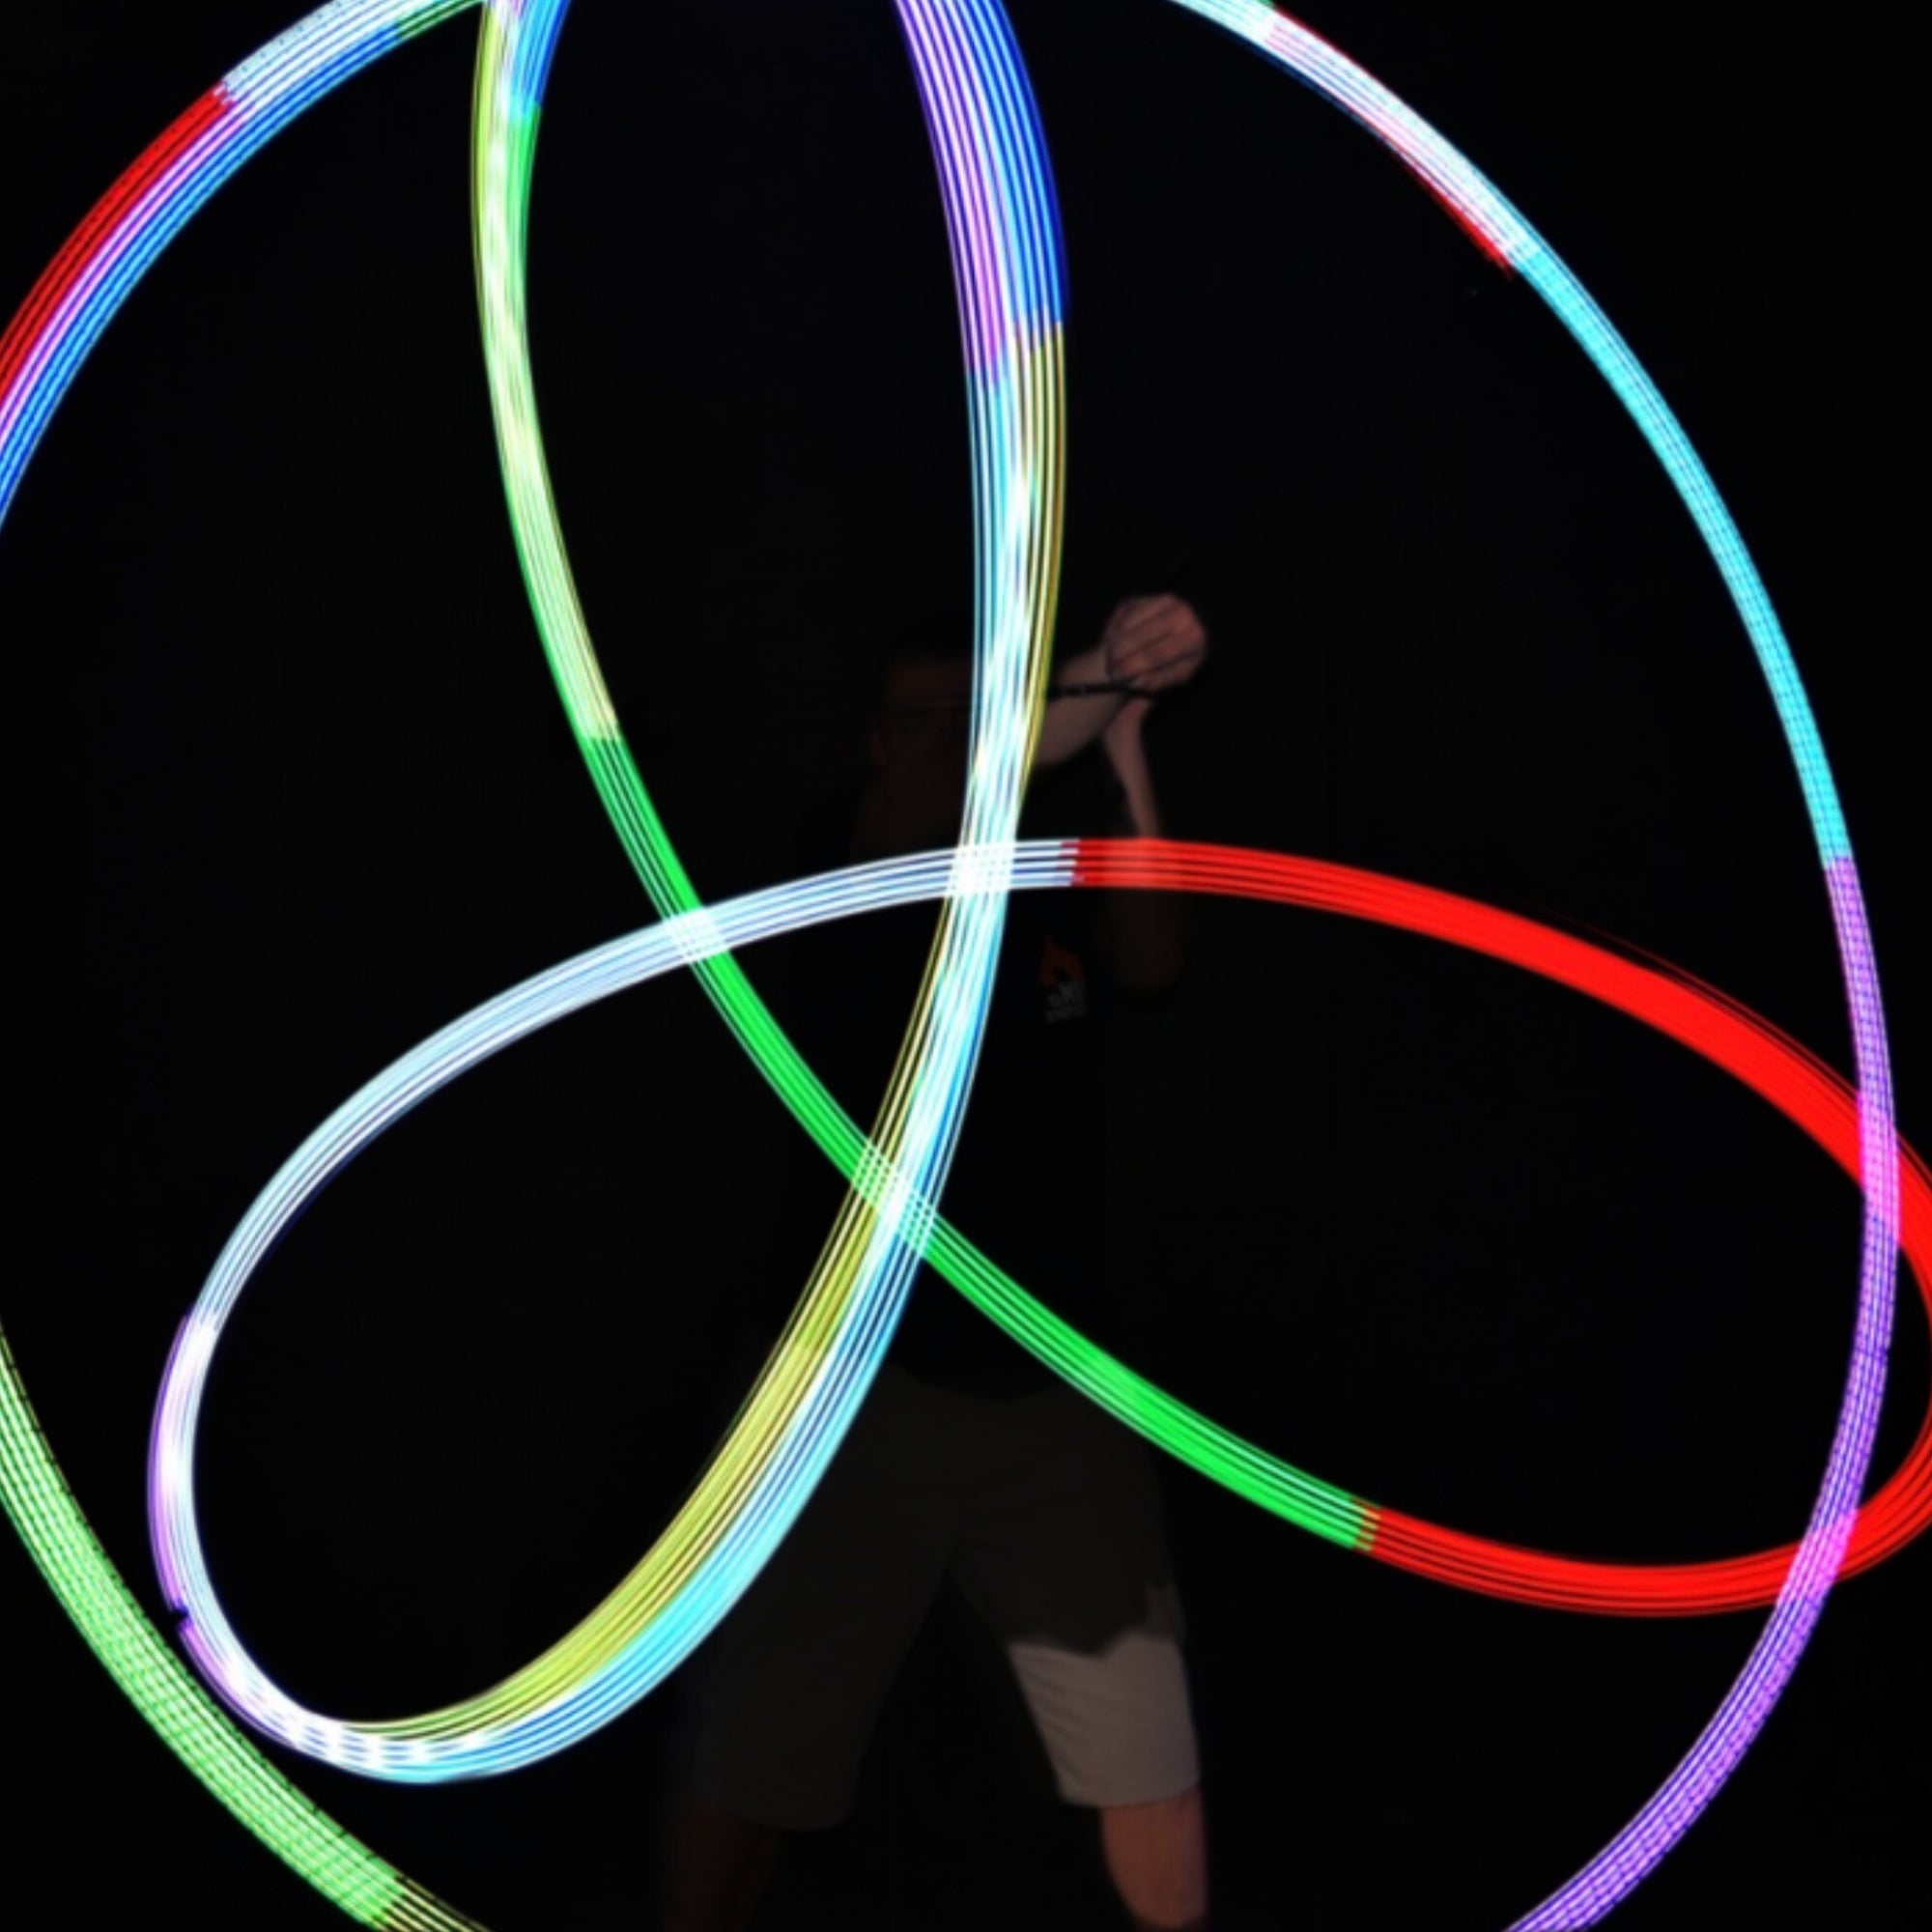 Glow poi spinning with light trails